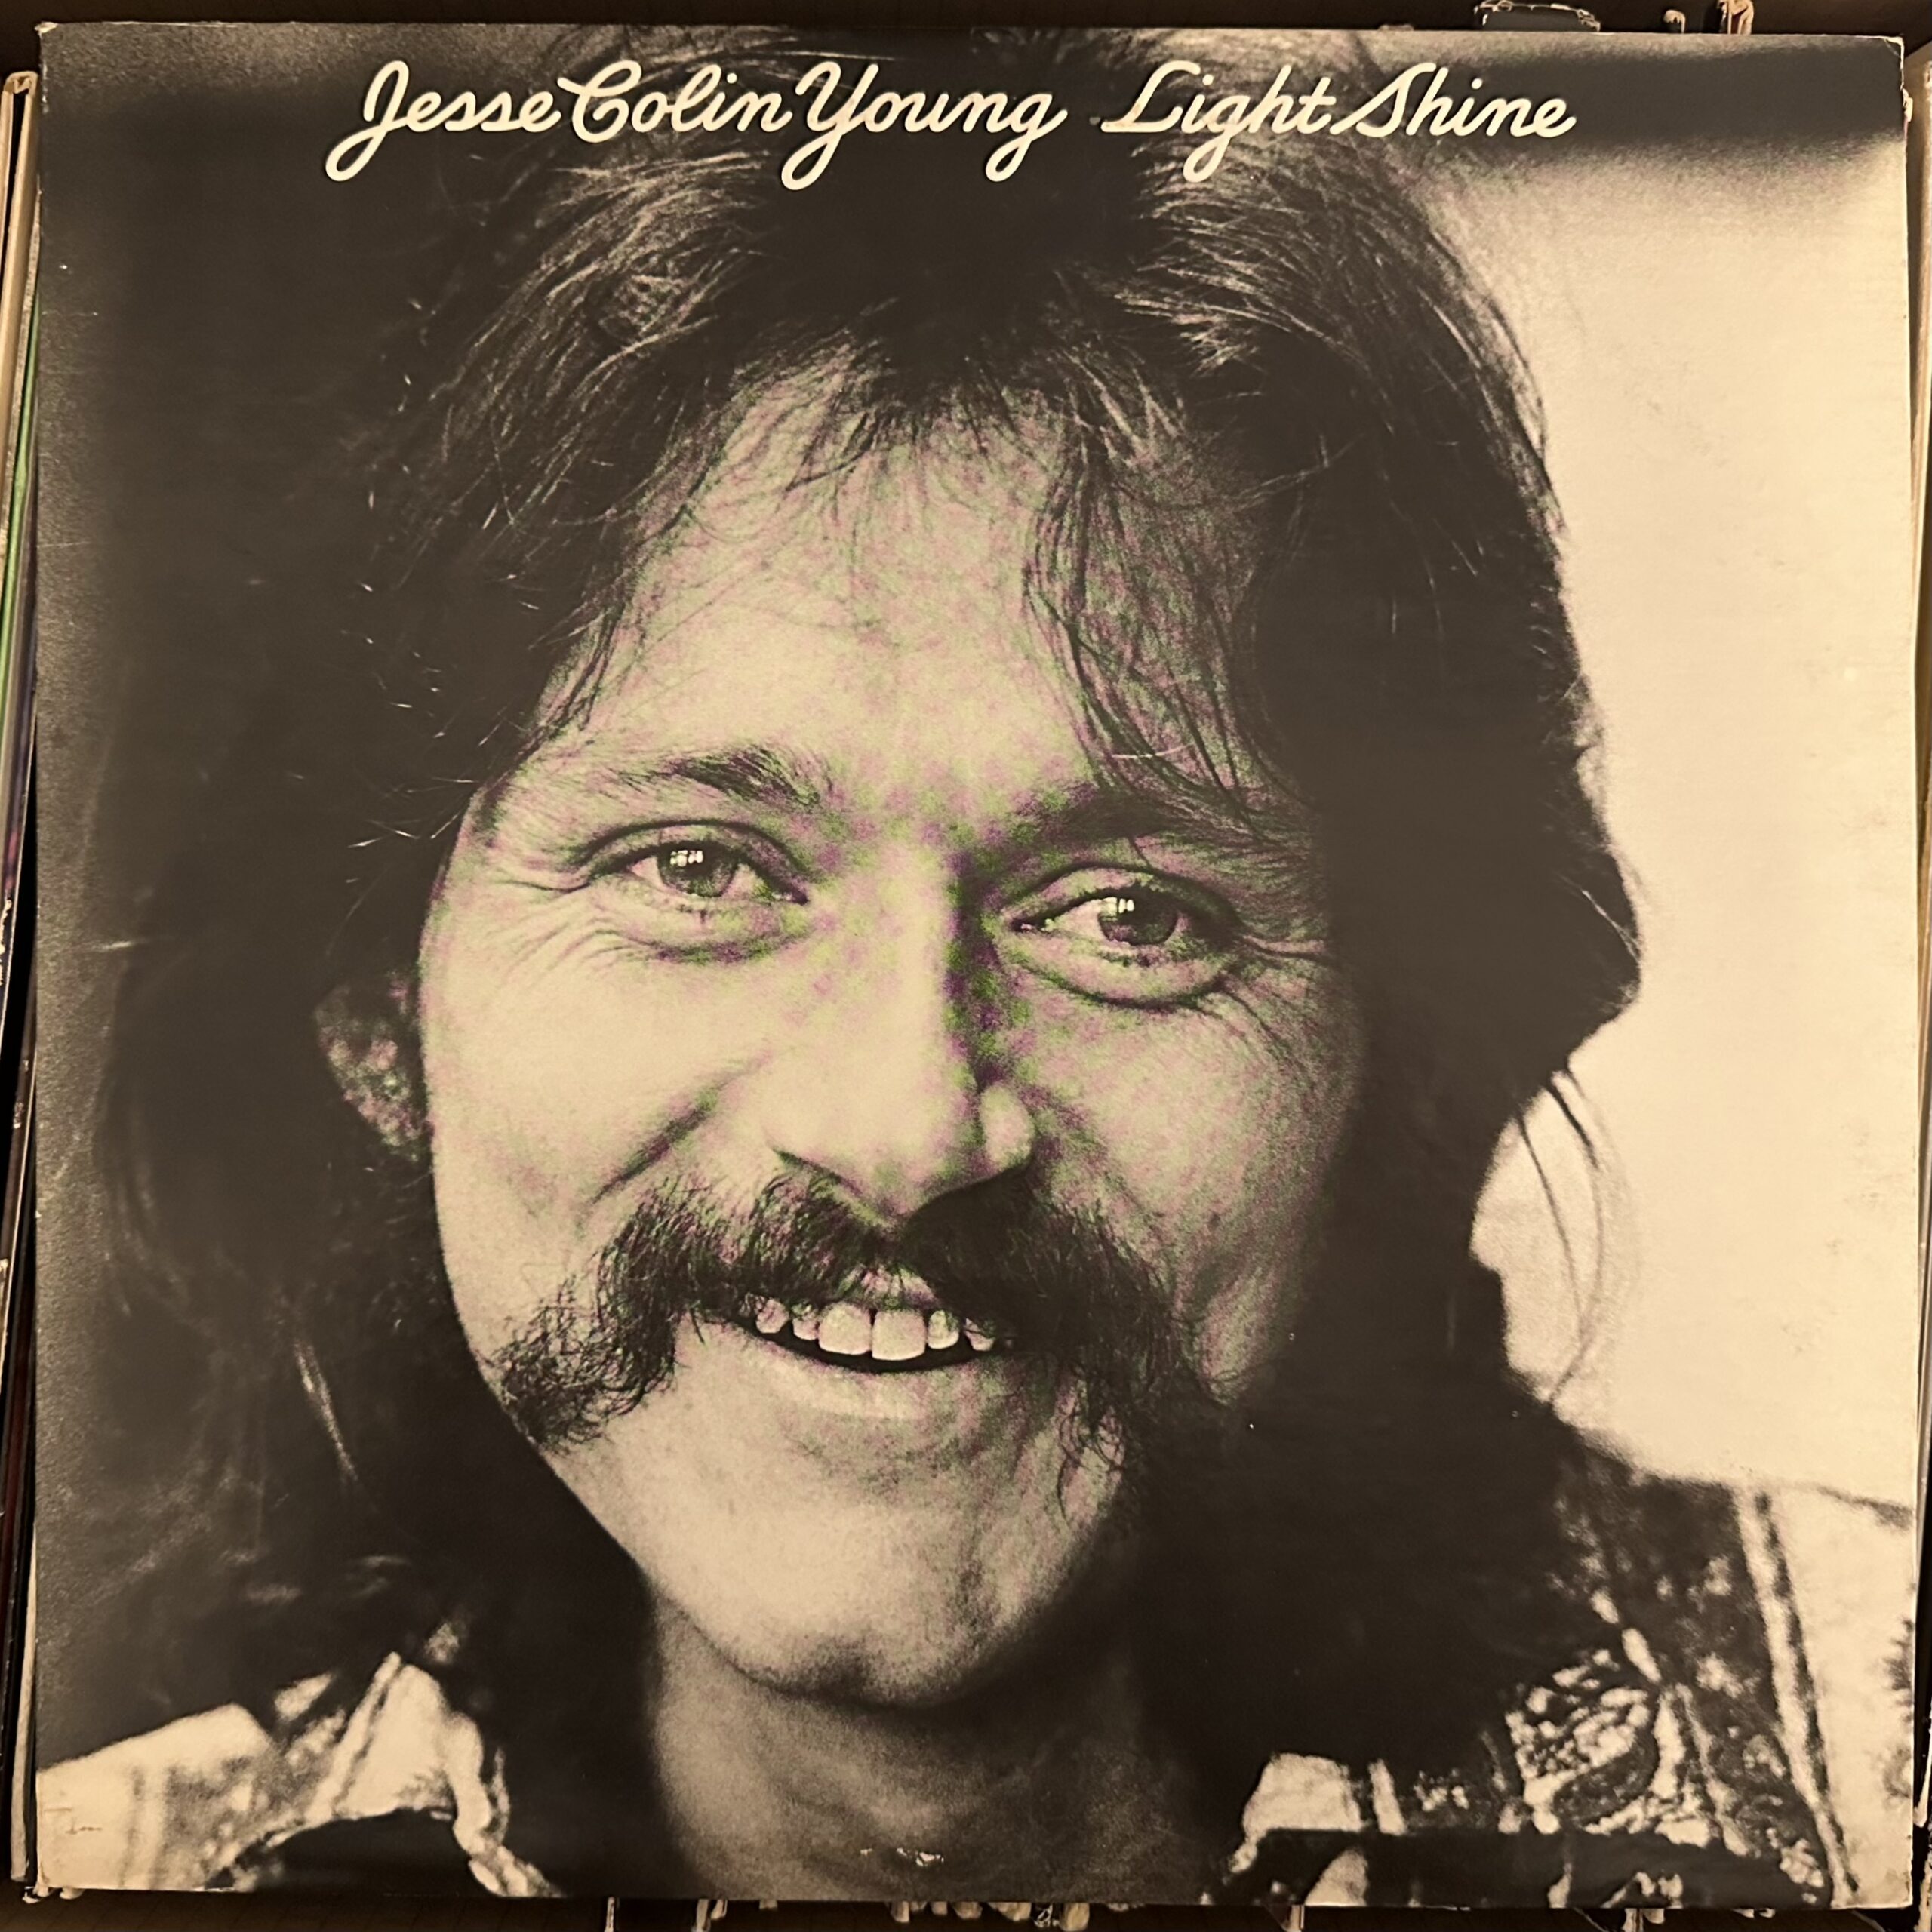 Light Shine by Jesse Colin Young